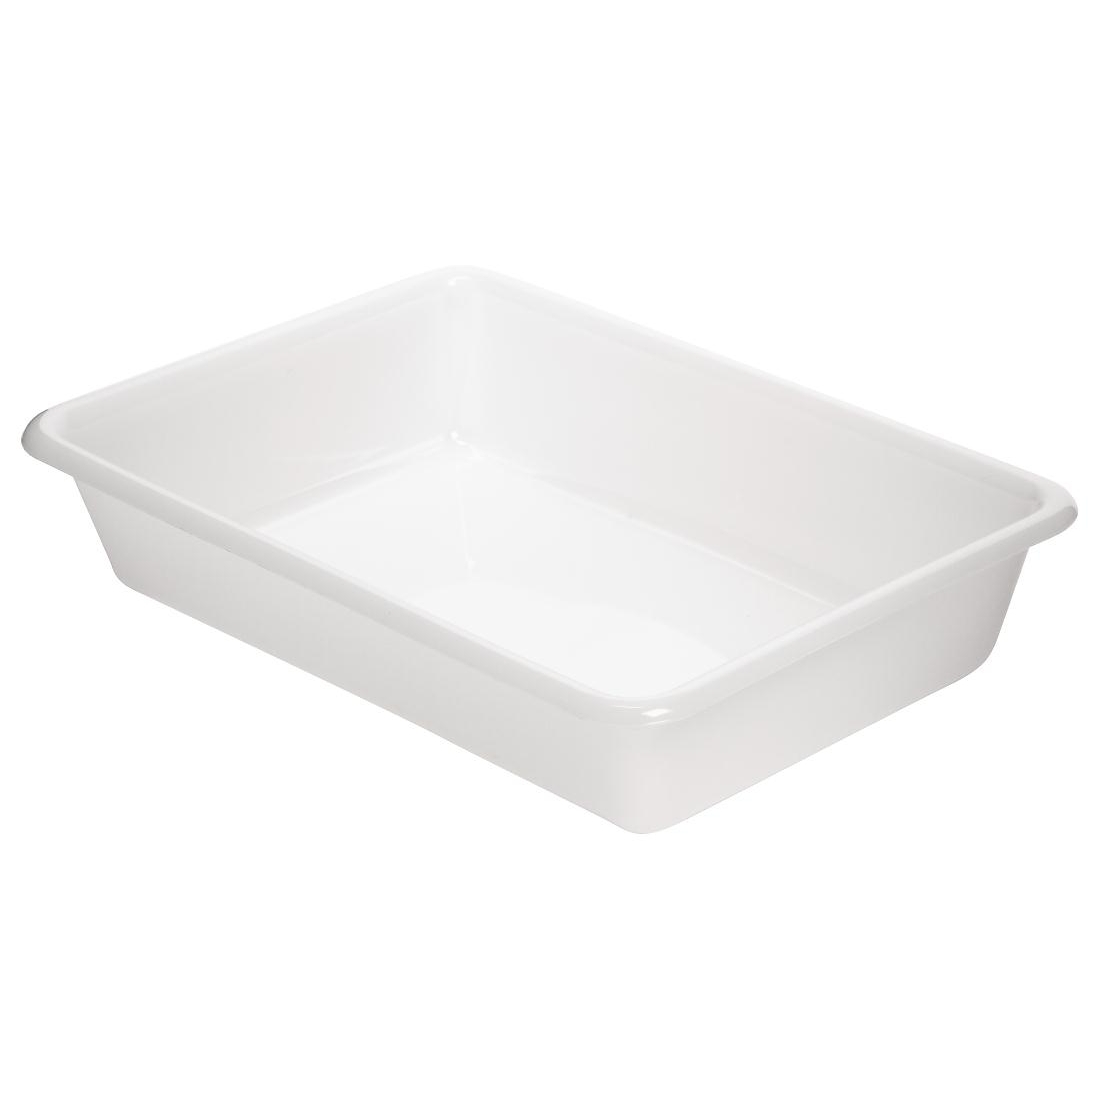 Araven Shallow Food Storage Tray 21in